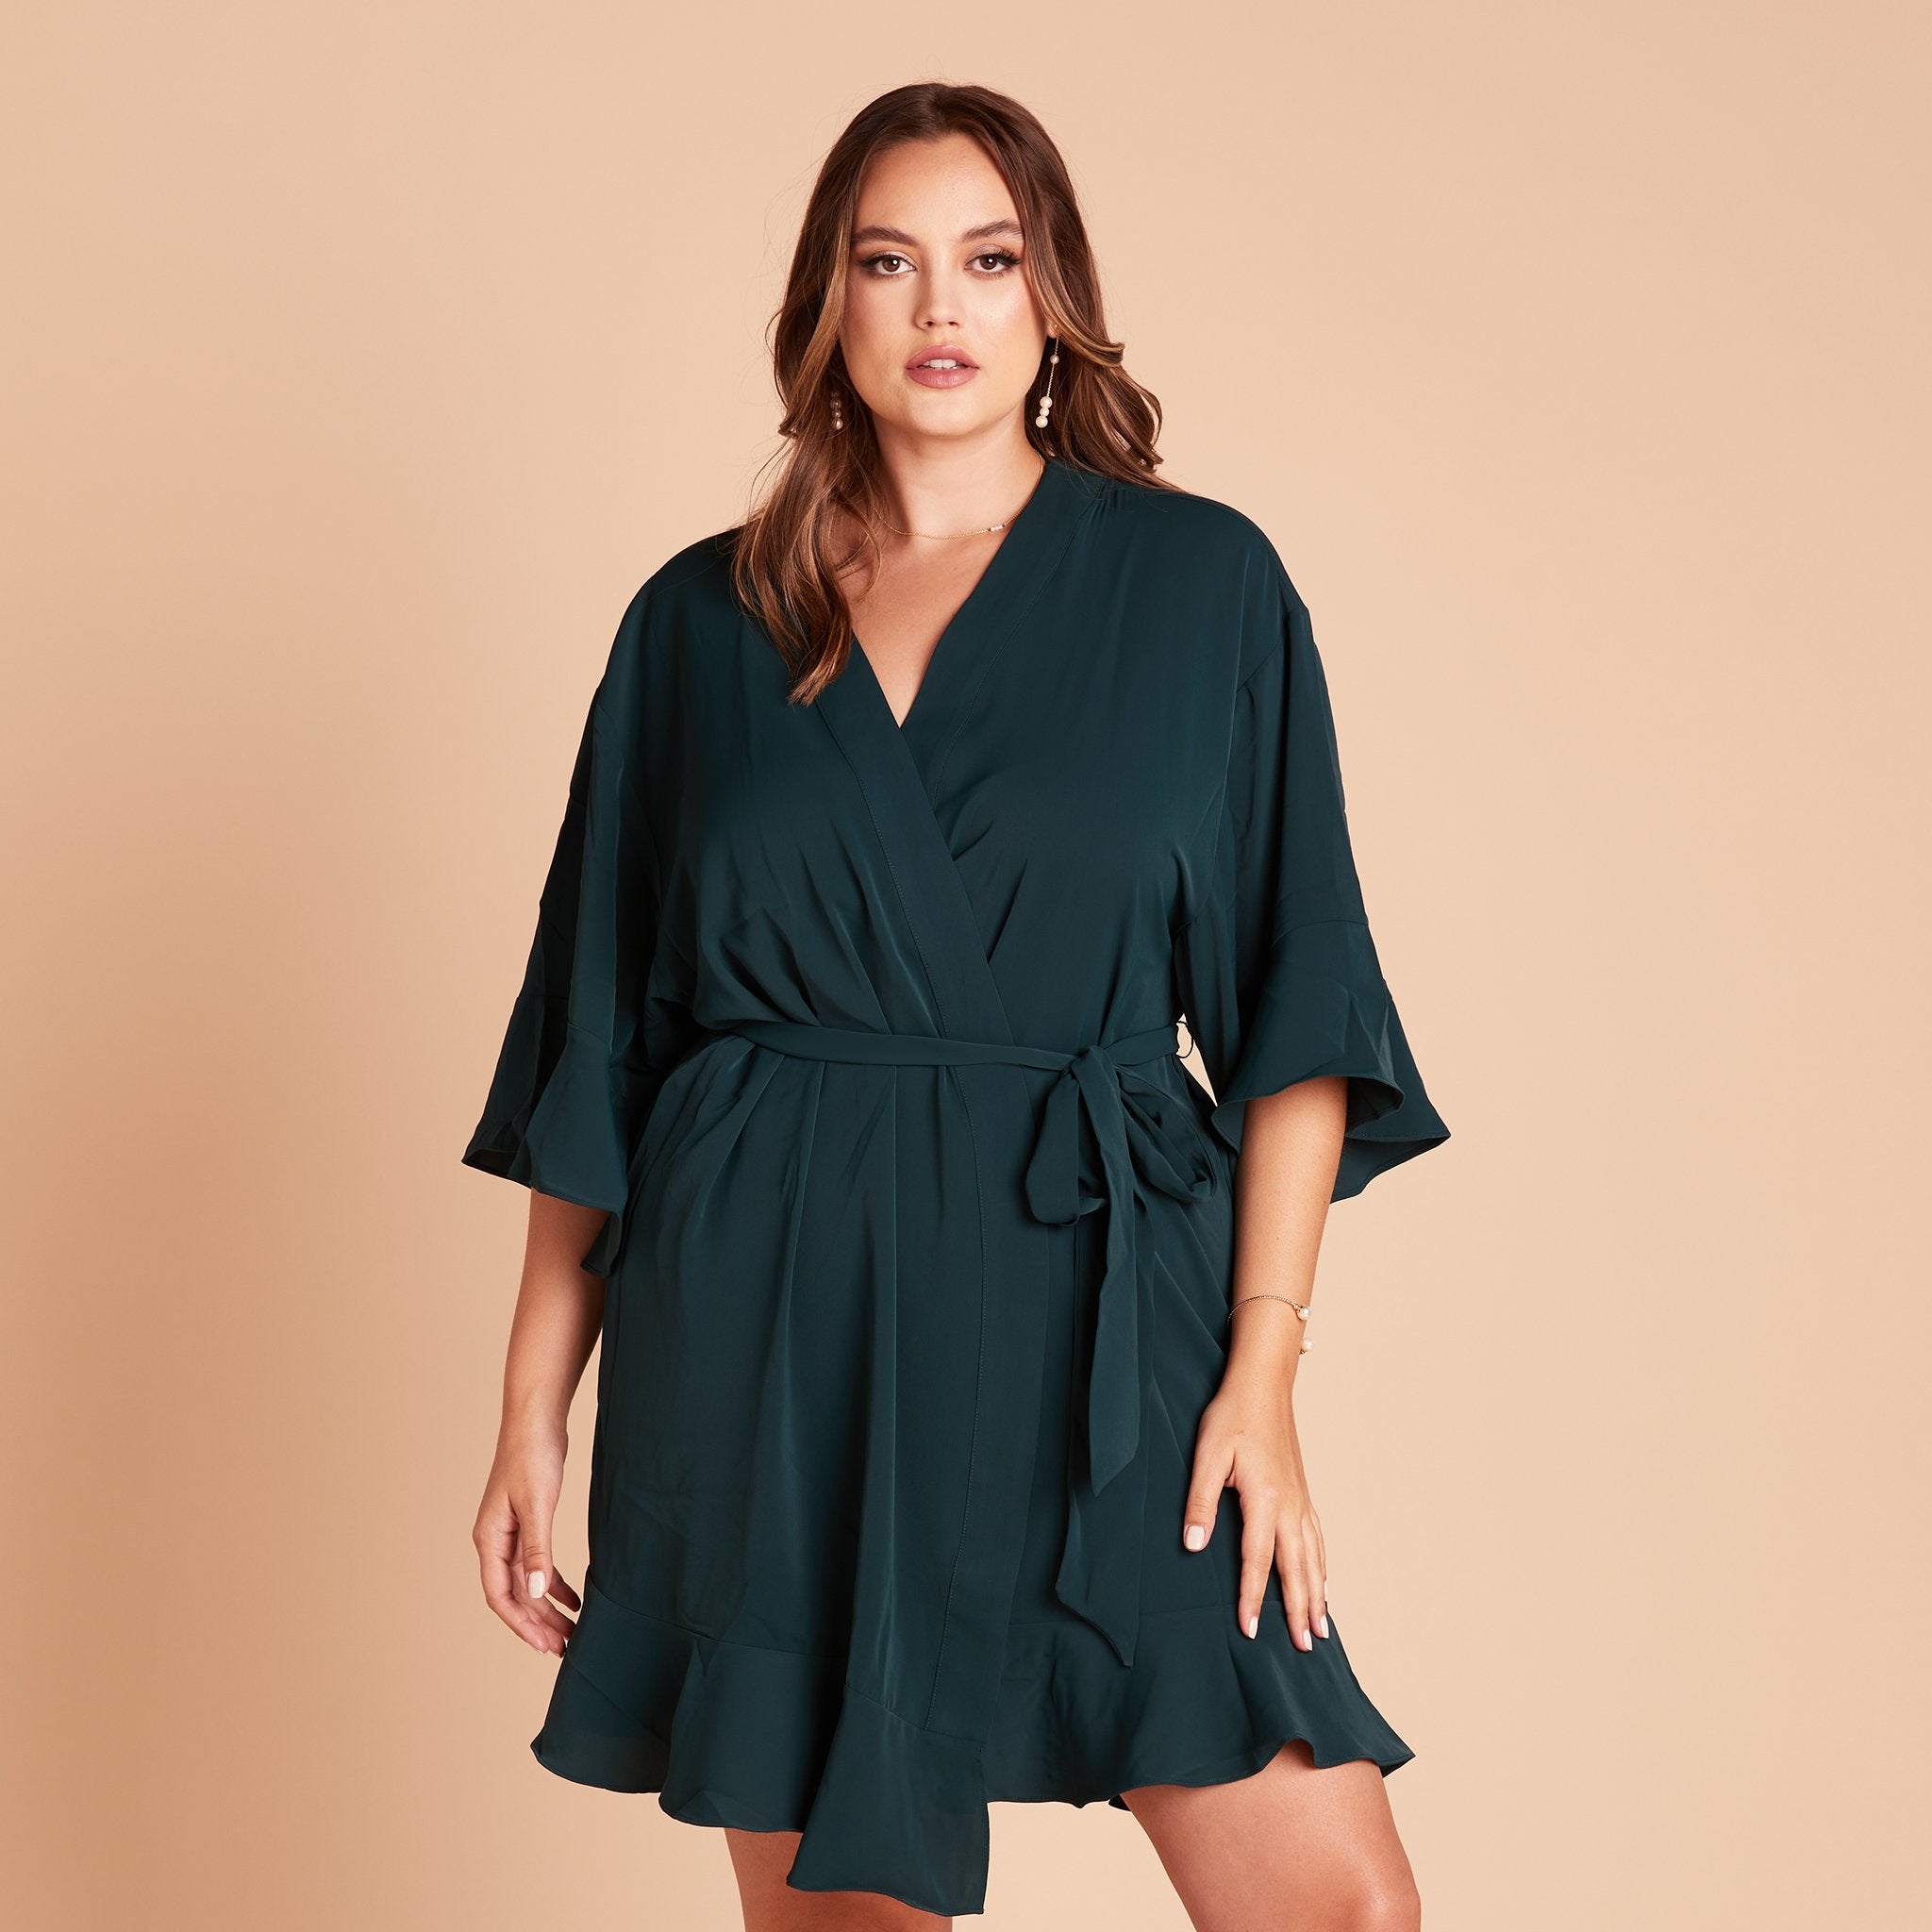 Kenny Ruffle Robe in emerald green by Birdy Grey, front view